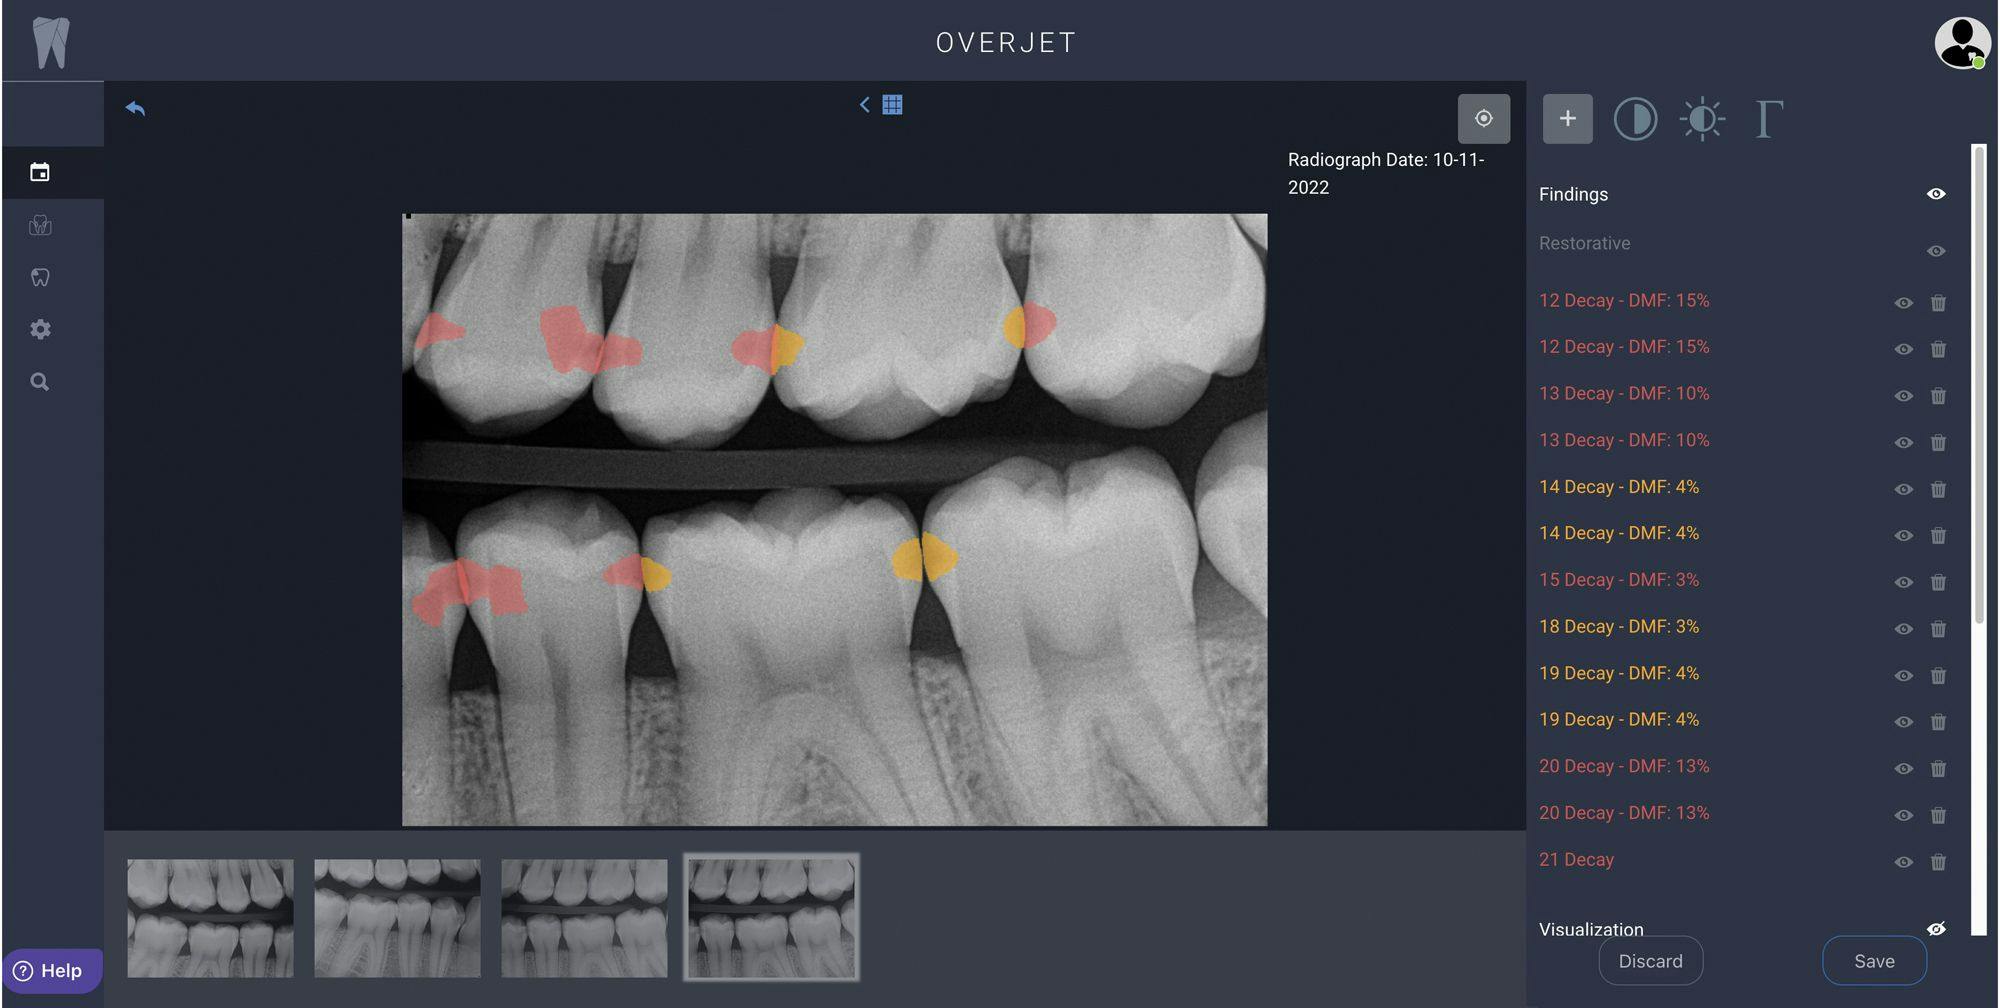 Overjet’s artificial intelligence analyzes x-rays in real time, providing clinicians with a full view of possible decay or periodontal disease markers